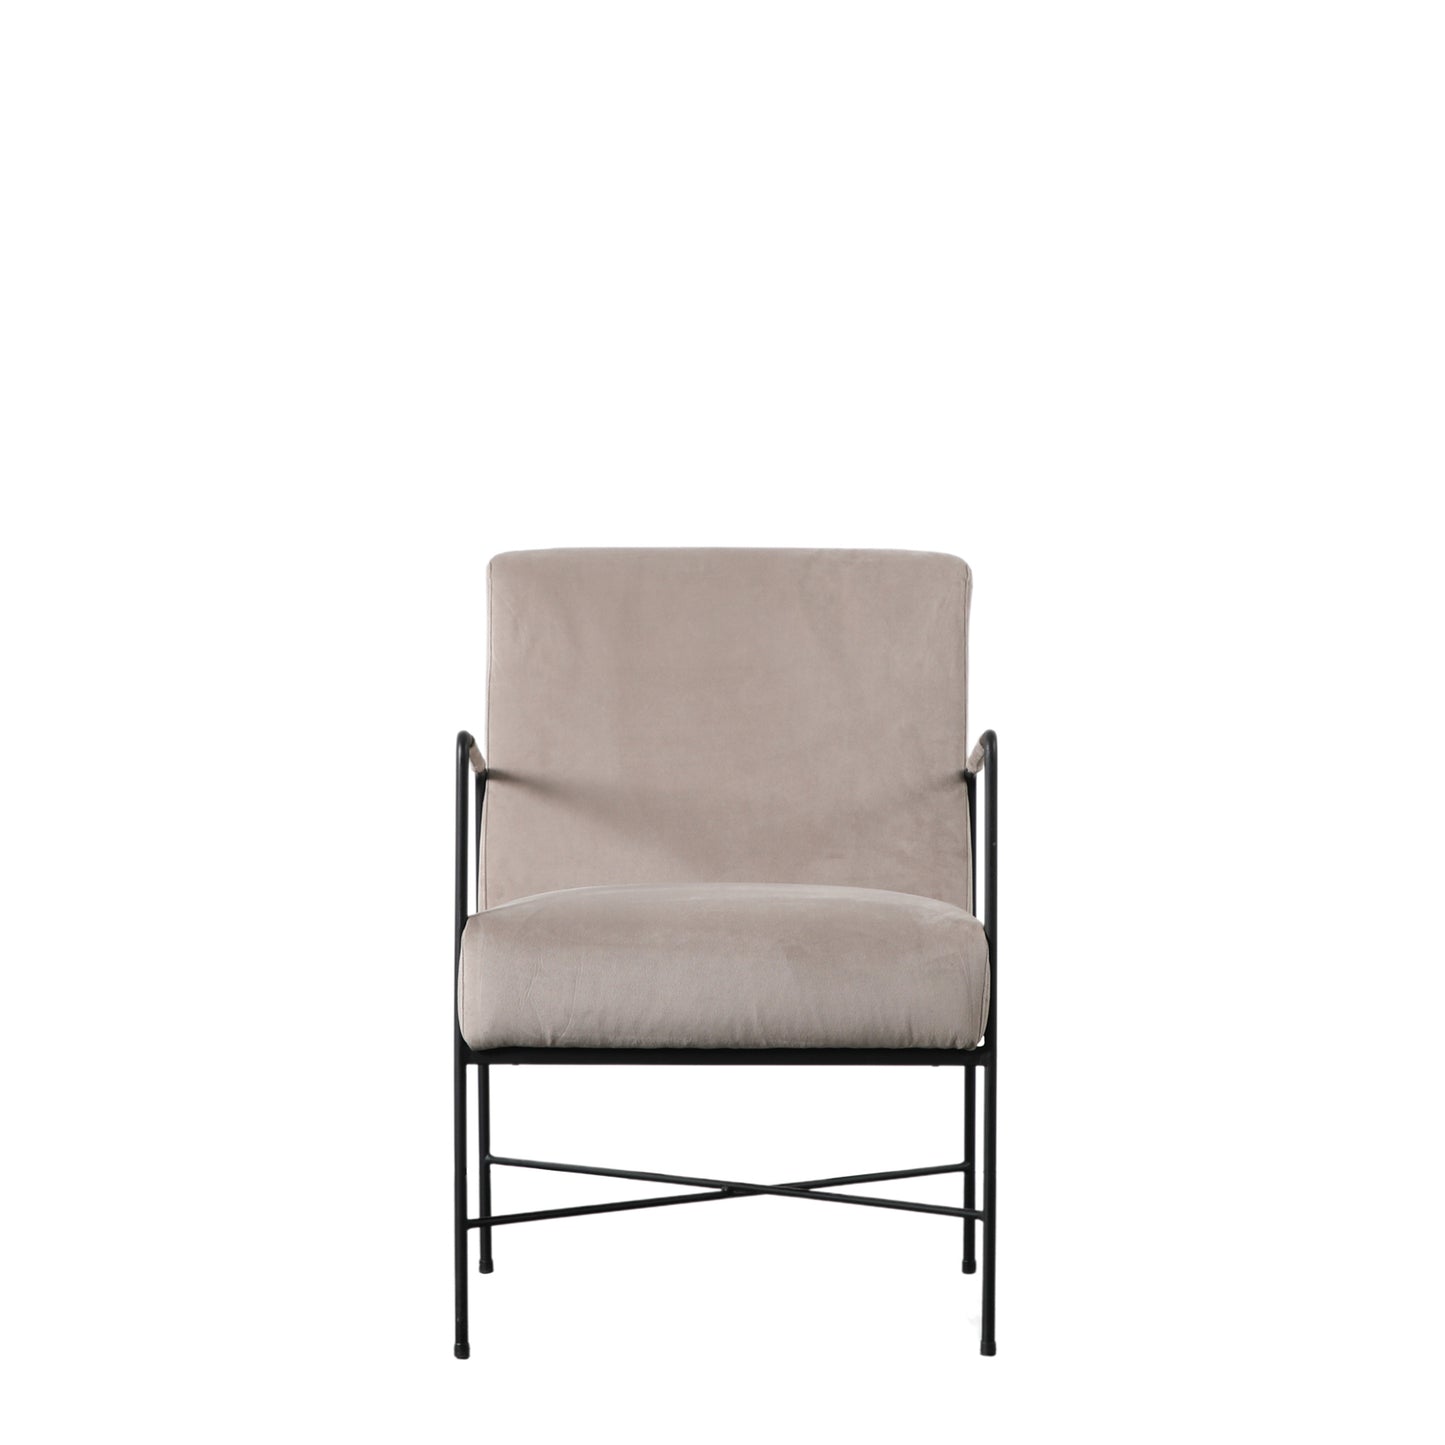 Load image into Gallery viewer, A Frogmore Armchair Grey with a beige upholstered seat and a black frame for home furniture or interior decor.
